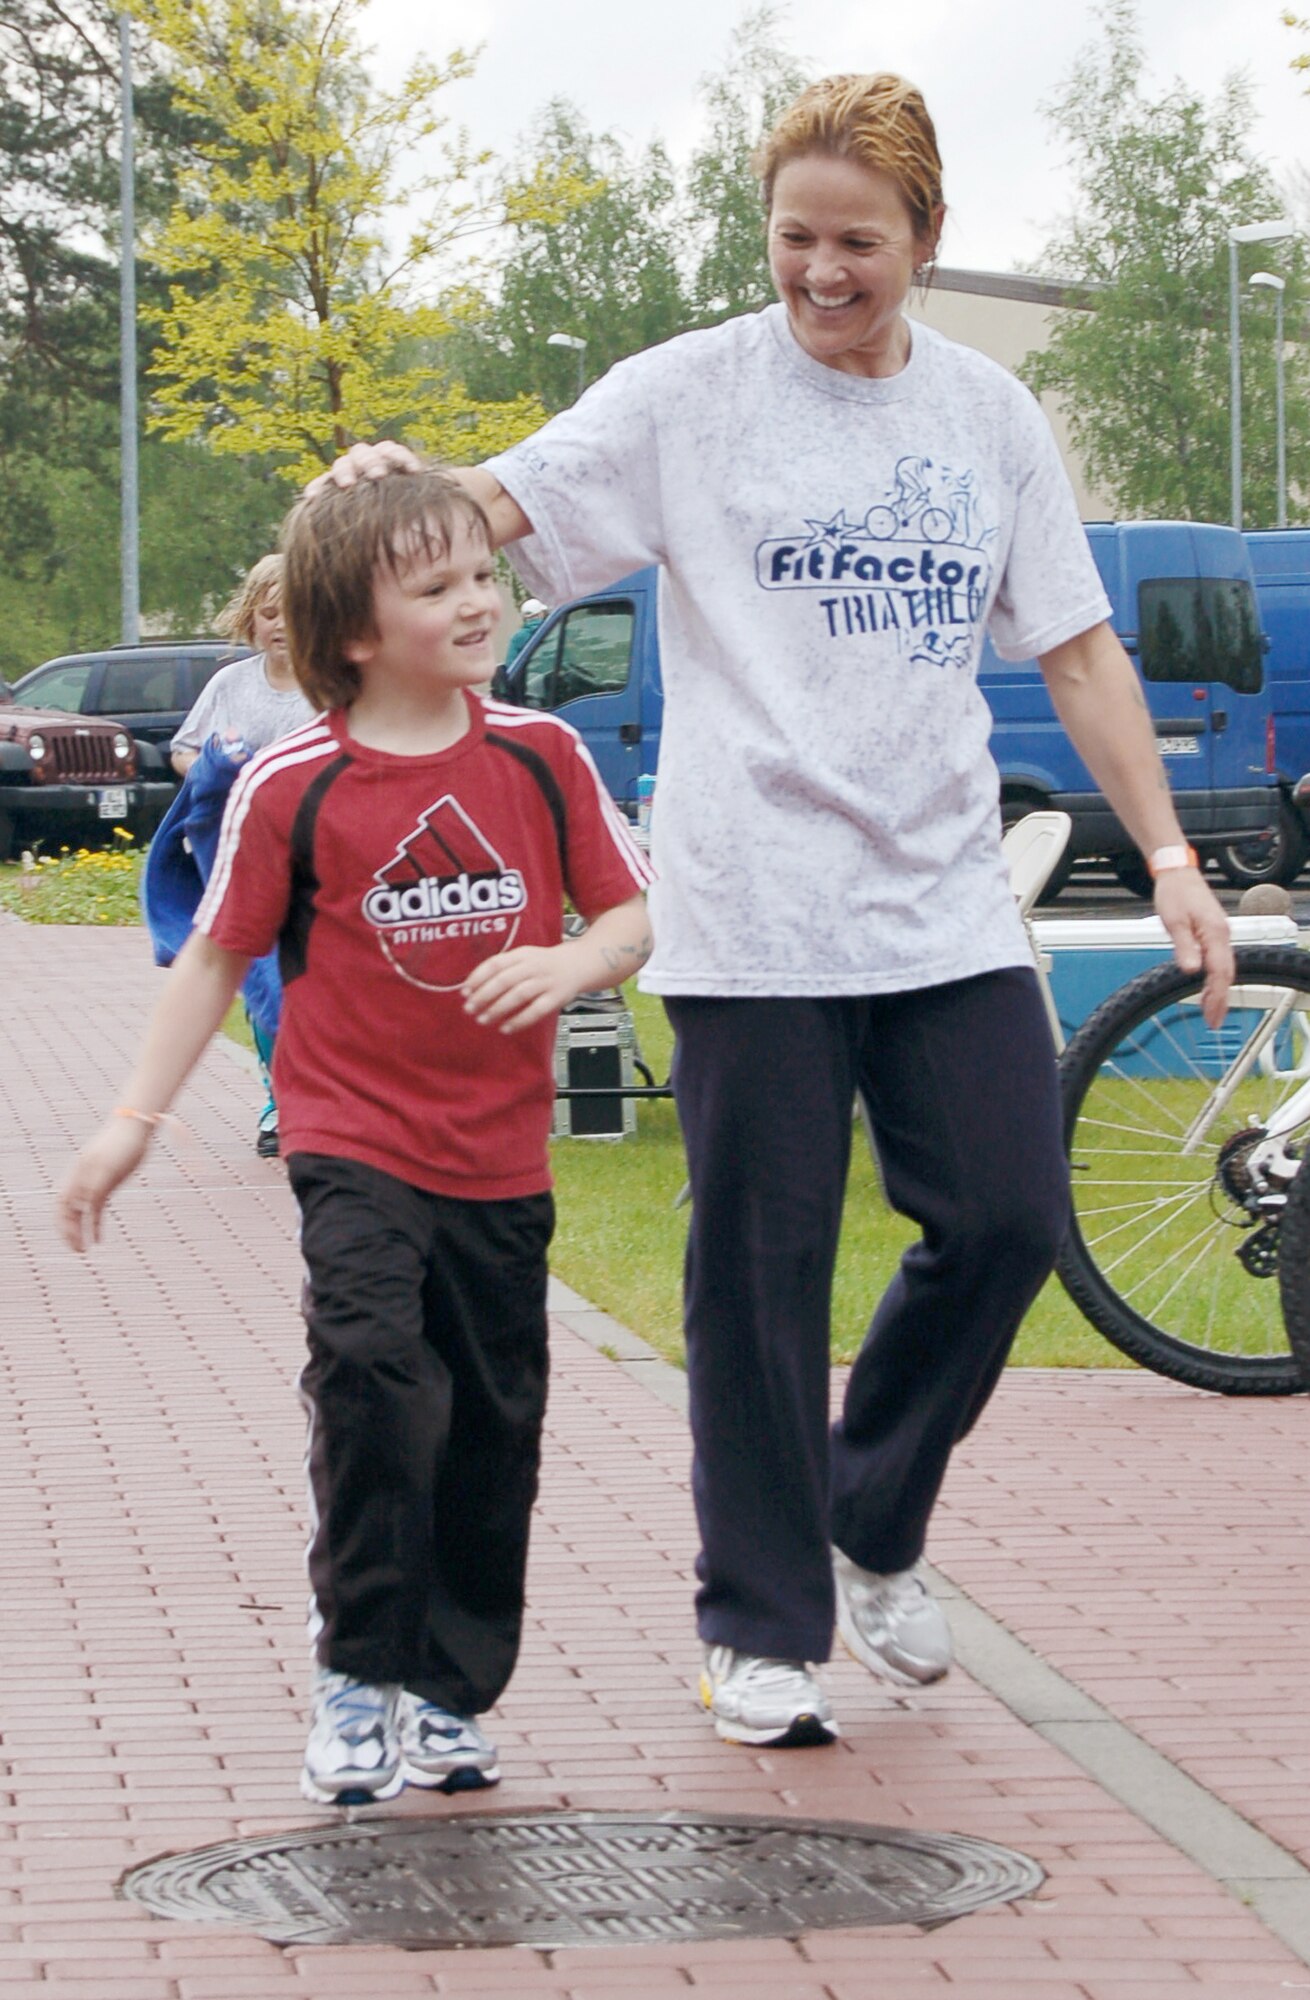 Laura Mitvalsky congratulates her son Eric Echtermeyer, 6, after completing the running portion of the second annual FitFactor Triathlon May 2, 2010, at Ramstein Air Base, Germany. Ms. Mitvalsky and her two children called themselves "Team FIT" (family in training) and each competed in a different portion of the event. Ms. Mitvalsky is assigned to the U.S. Army Public Health Command. (U.S. Air Force photo/Senior Airman Amanda Dick)